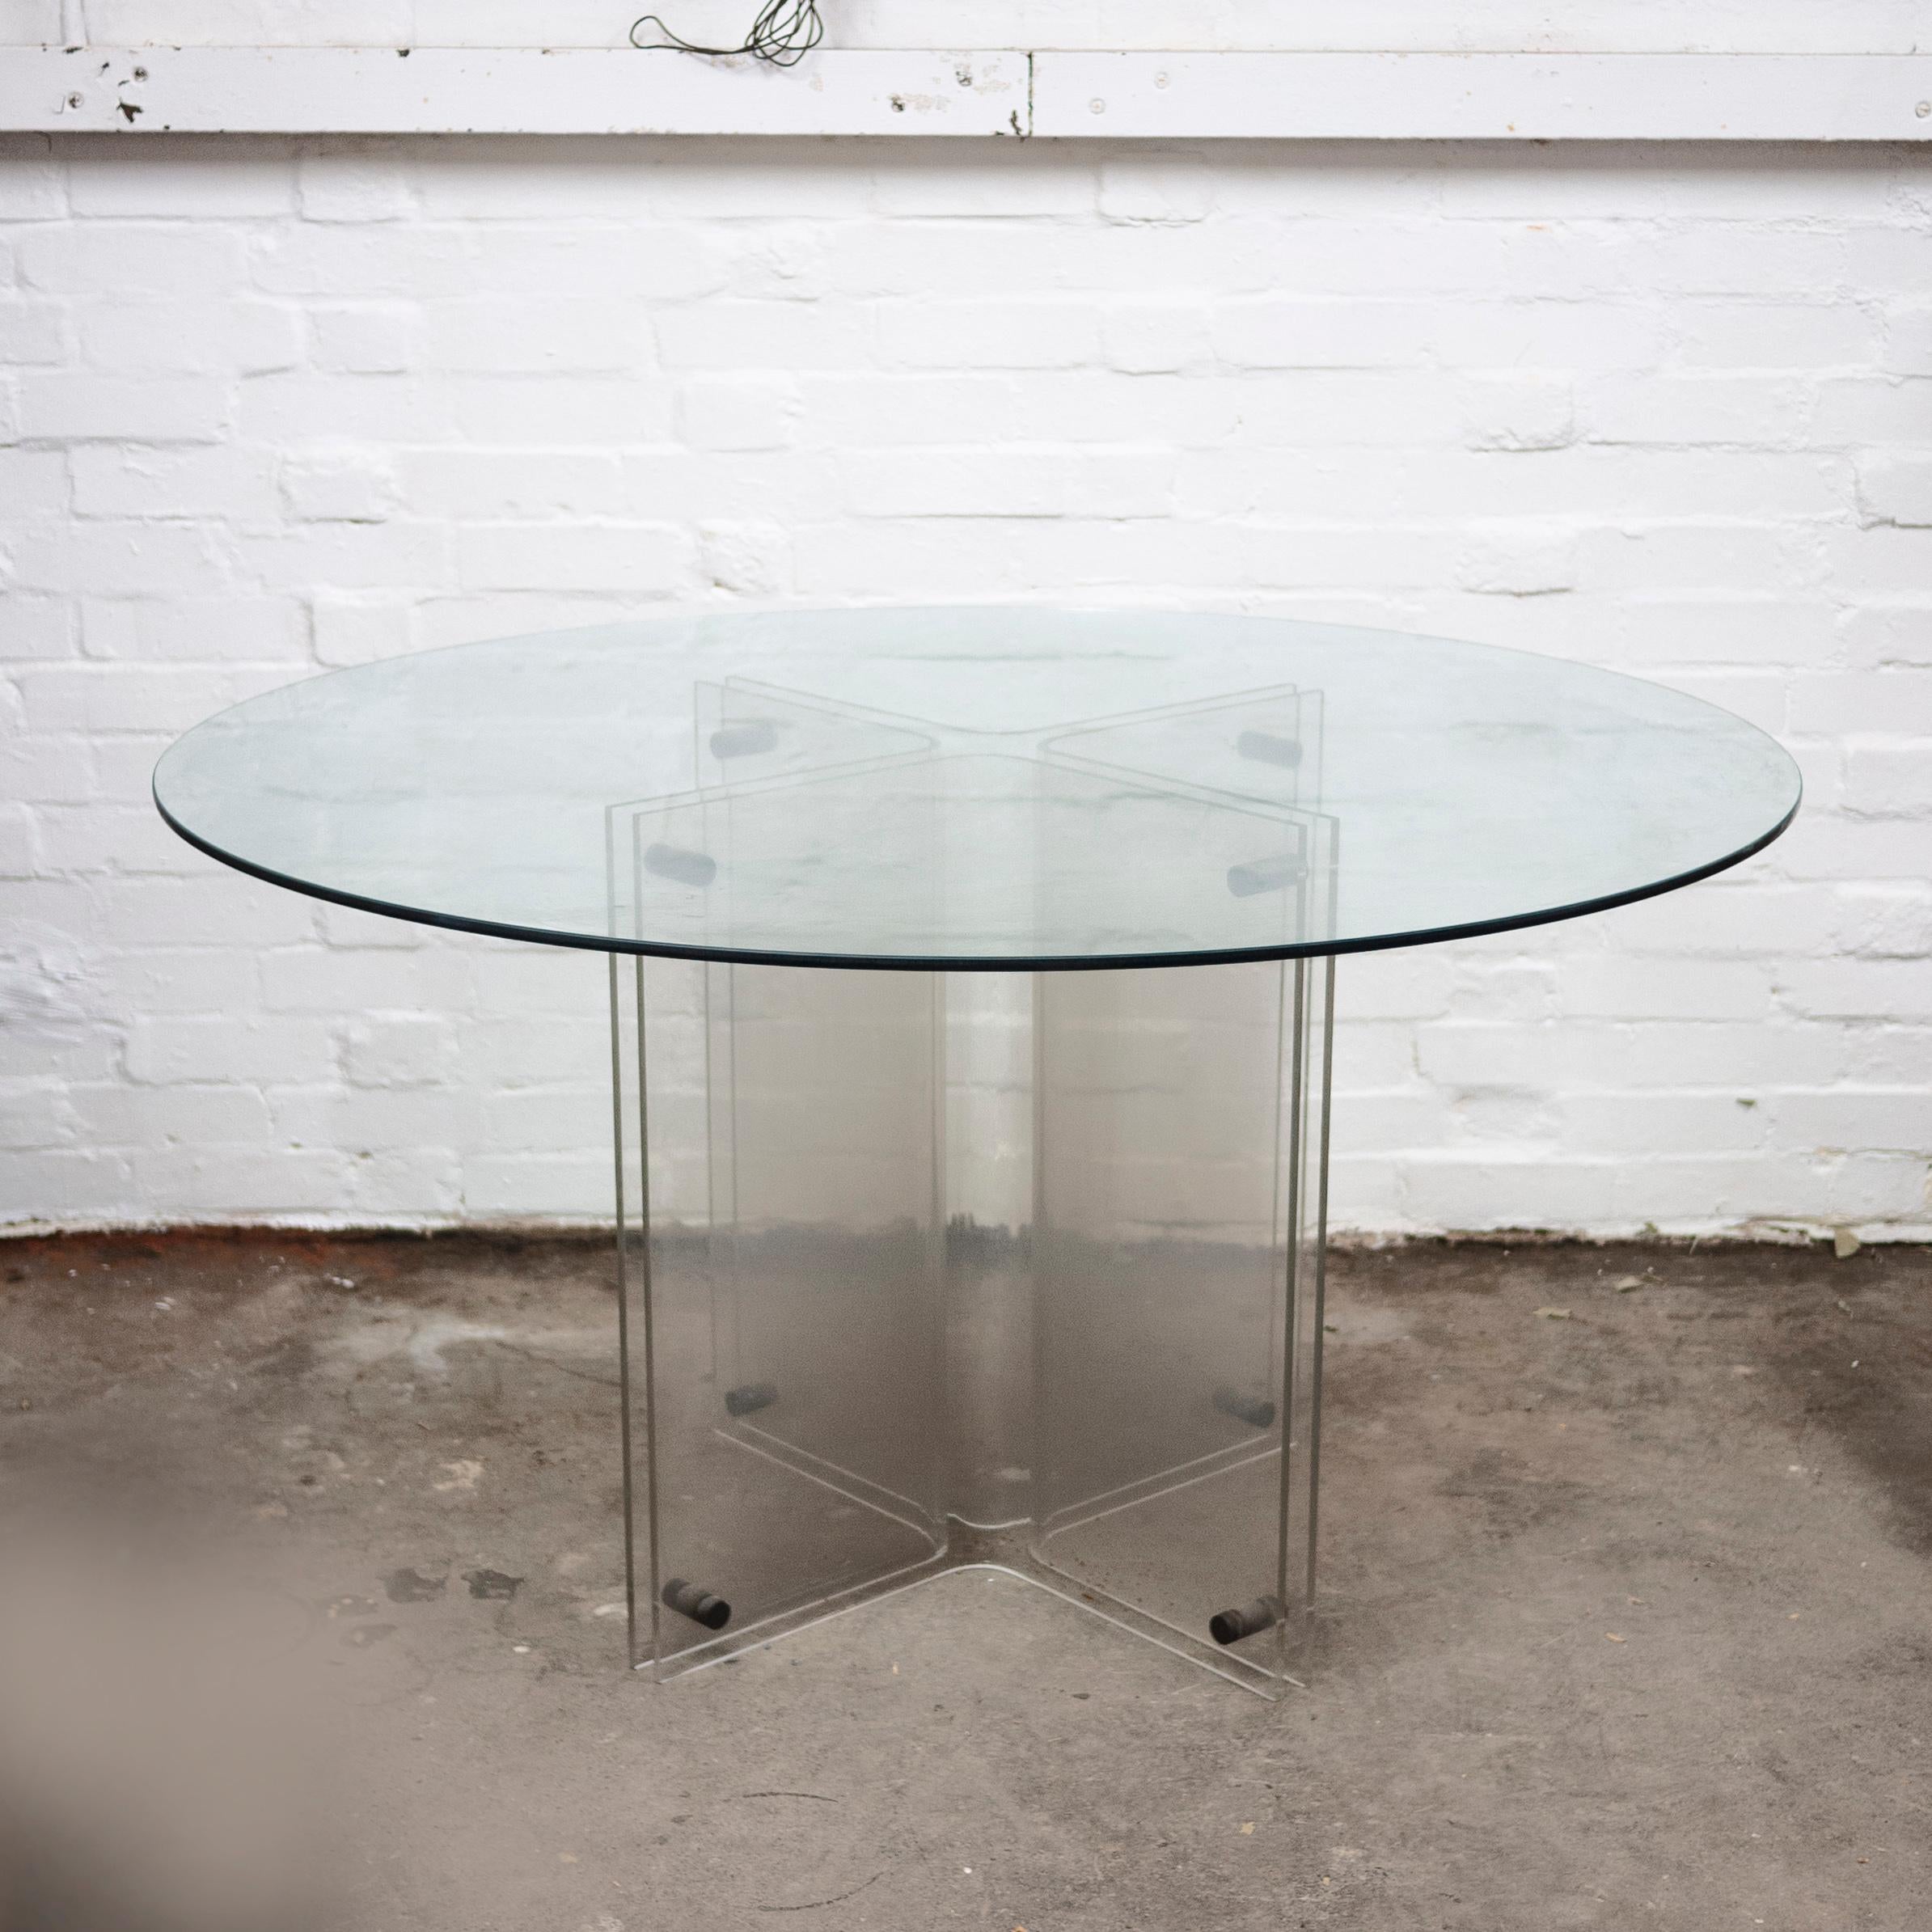 A glass and lucite dining table with a pedestal base in the style of hollywood regency.

Manufacturer - Unknown

Design Period - 1980 to 1989

Style - Hollywood Regency

Detailed Condition - Good with minimal defects.

Restoration and